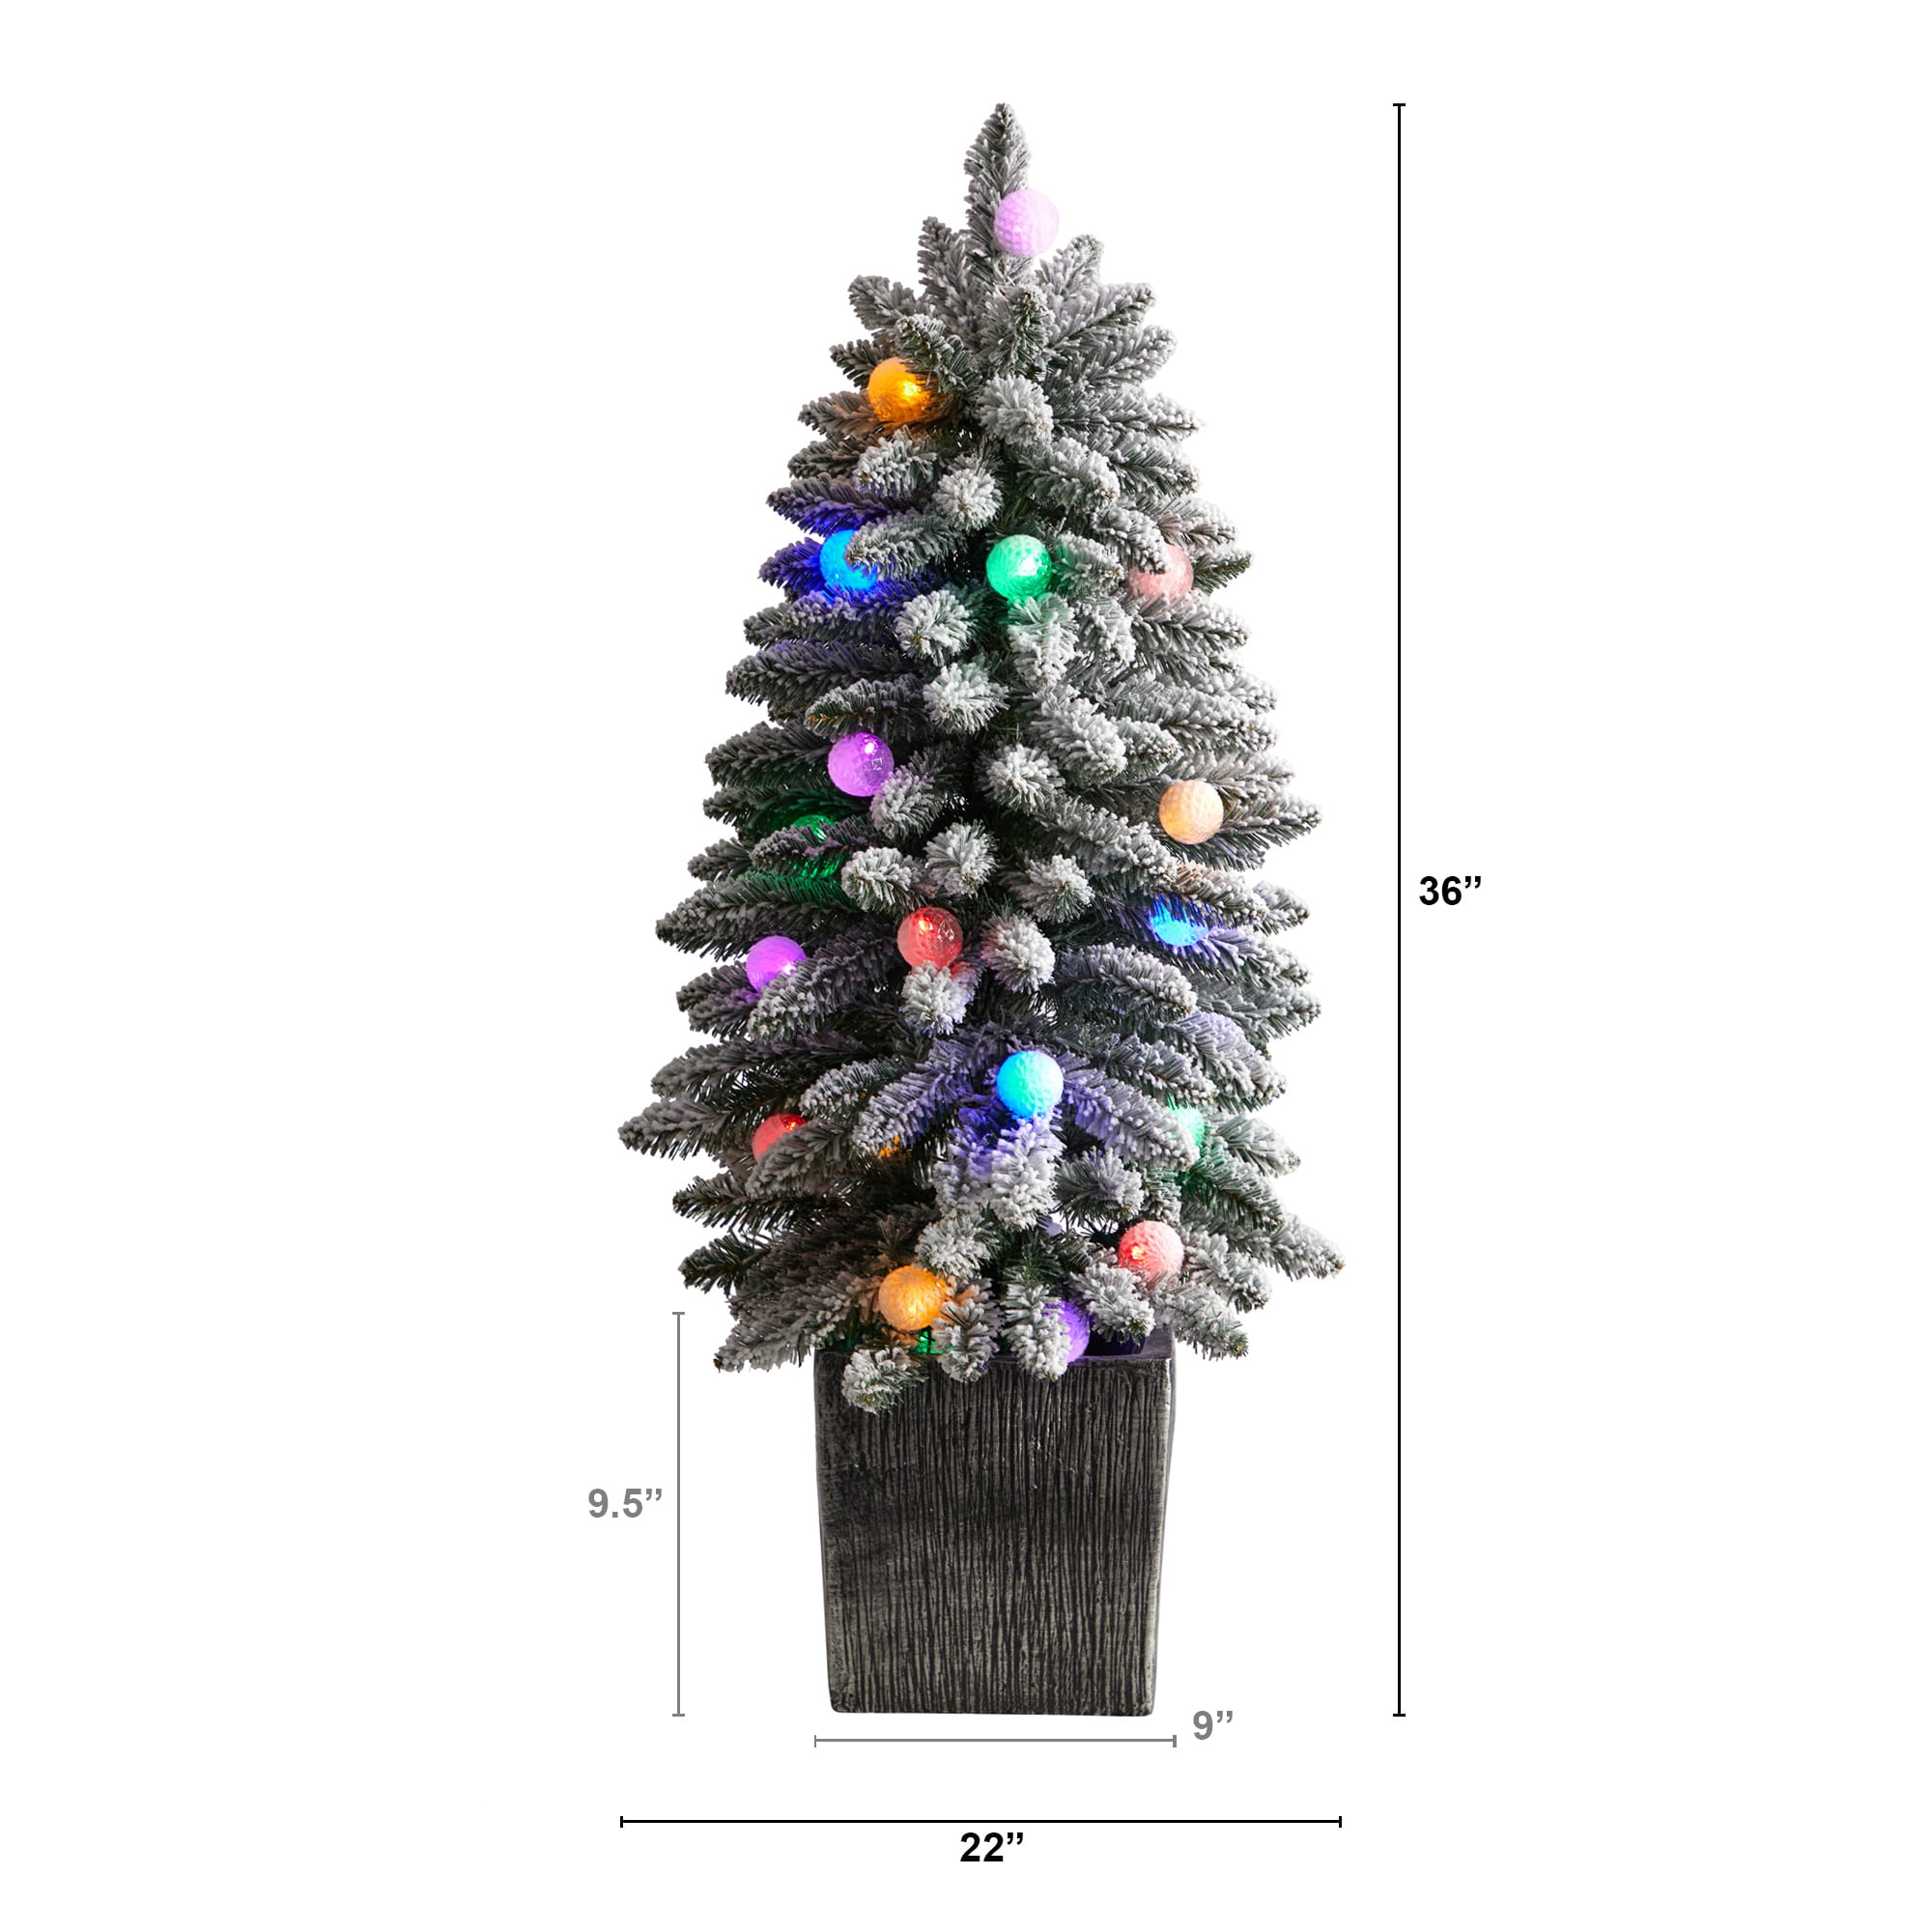  Goplus 4ft Pre-Lit Christmas Tree for Entrances, Artificial  Potted Xmas Tree with 100 LED Lights, Timer, 3 Lighting Modes, 160 Branch  Tips, Antique Urn Base, Porch Indoor Holiday Christmas Decoration 